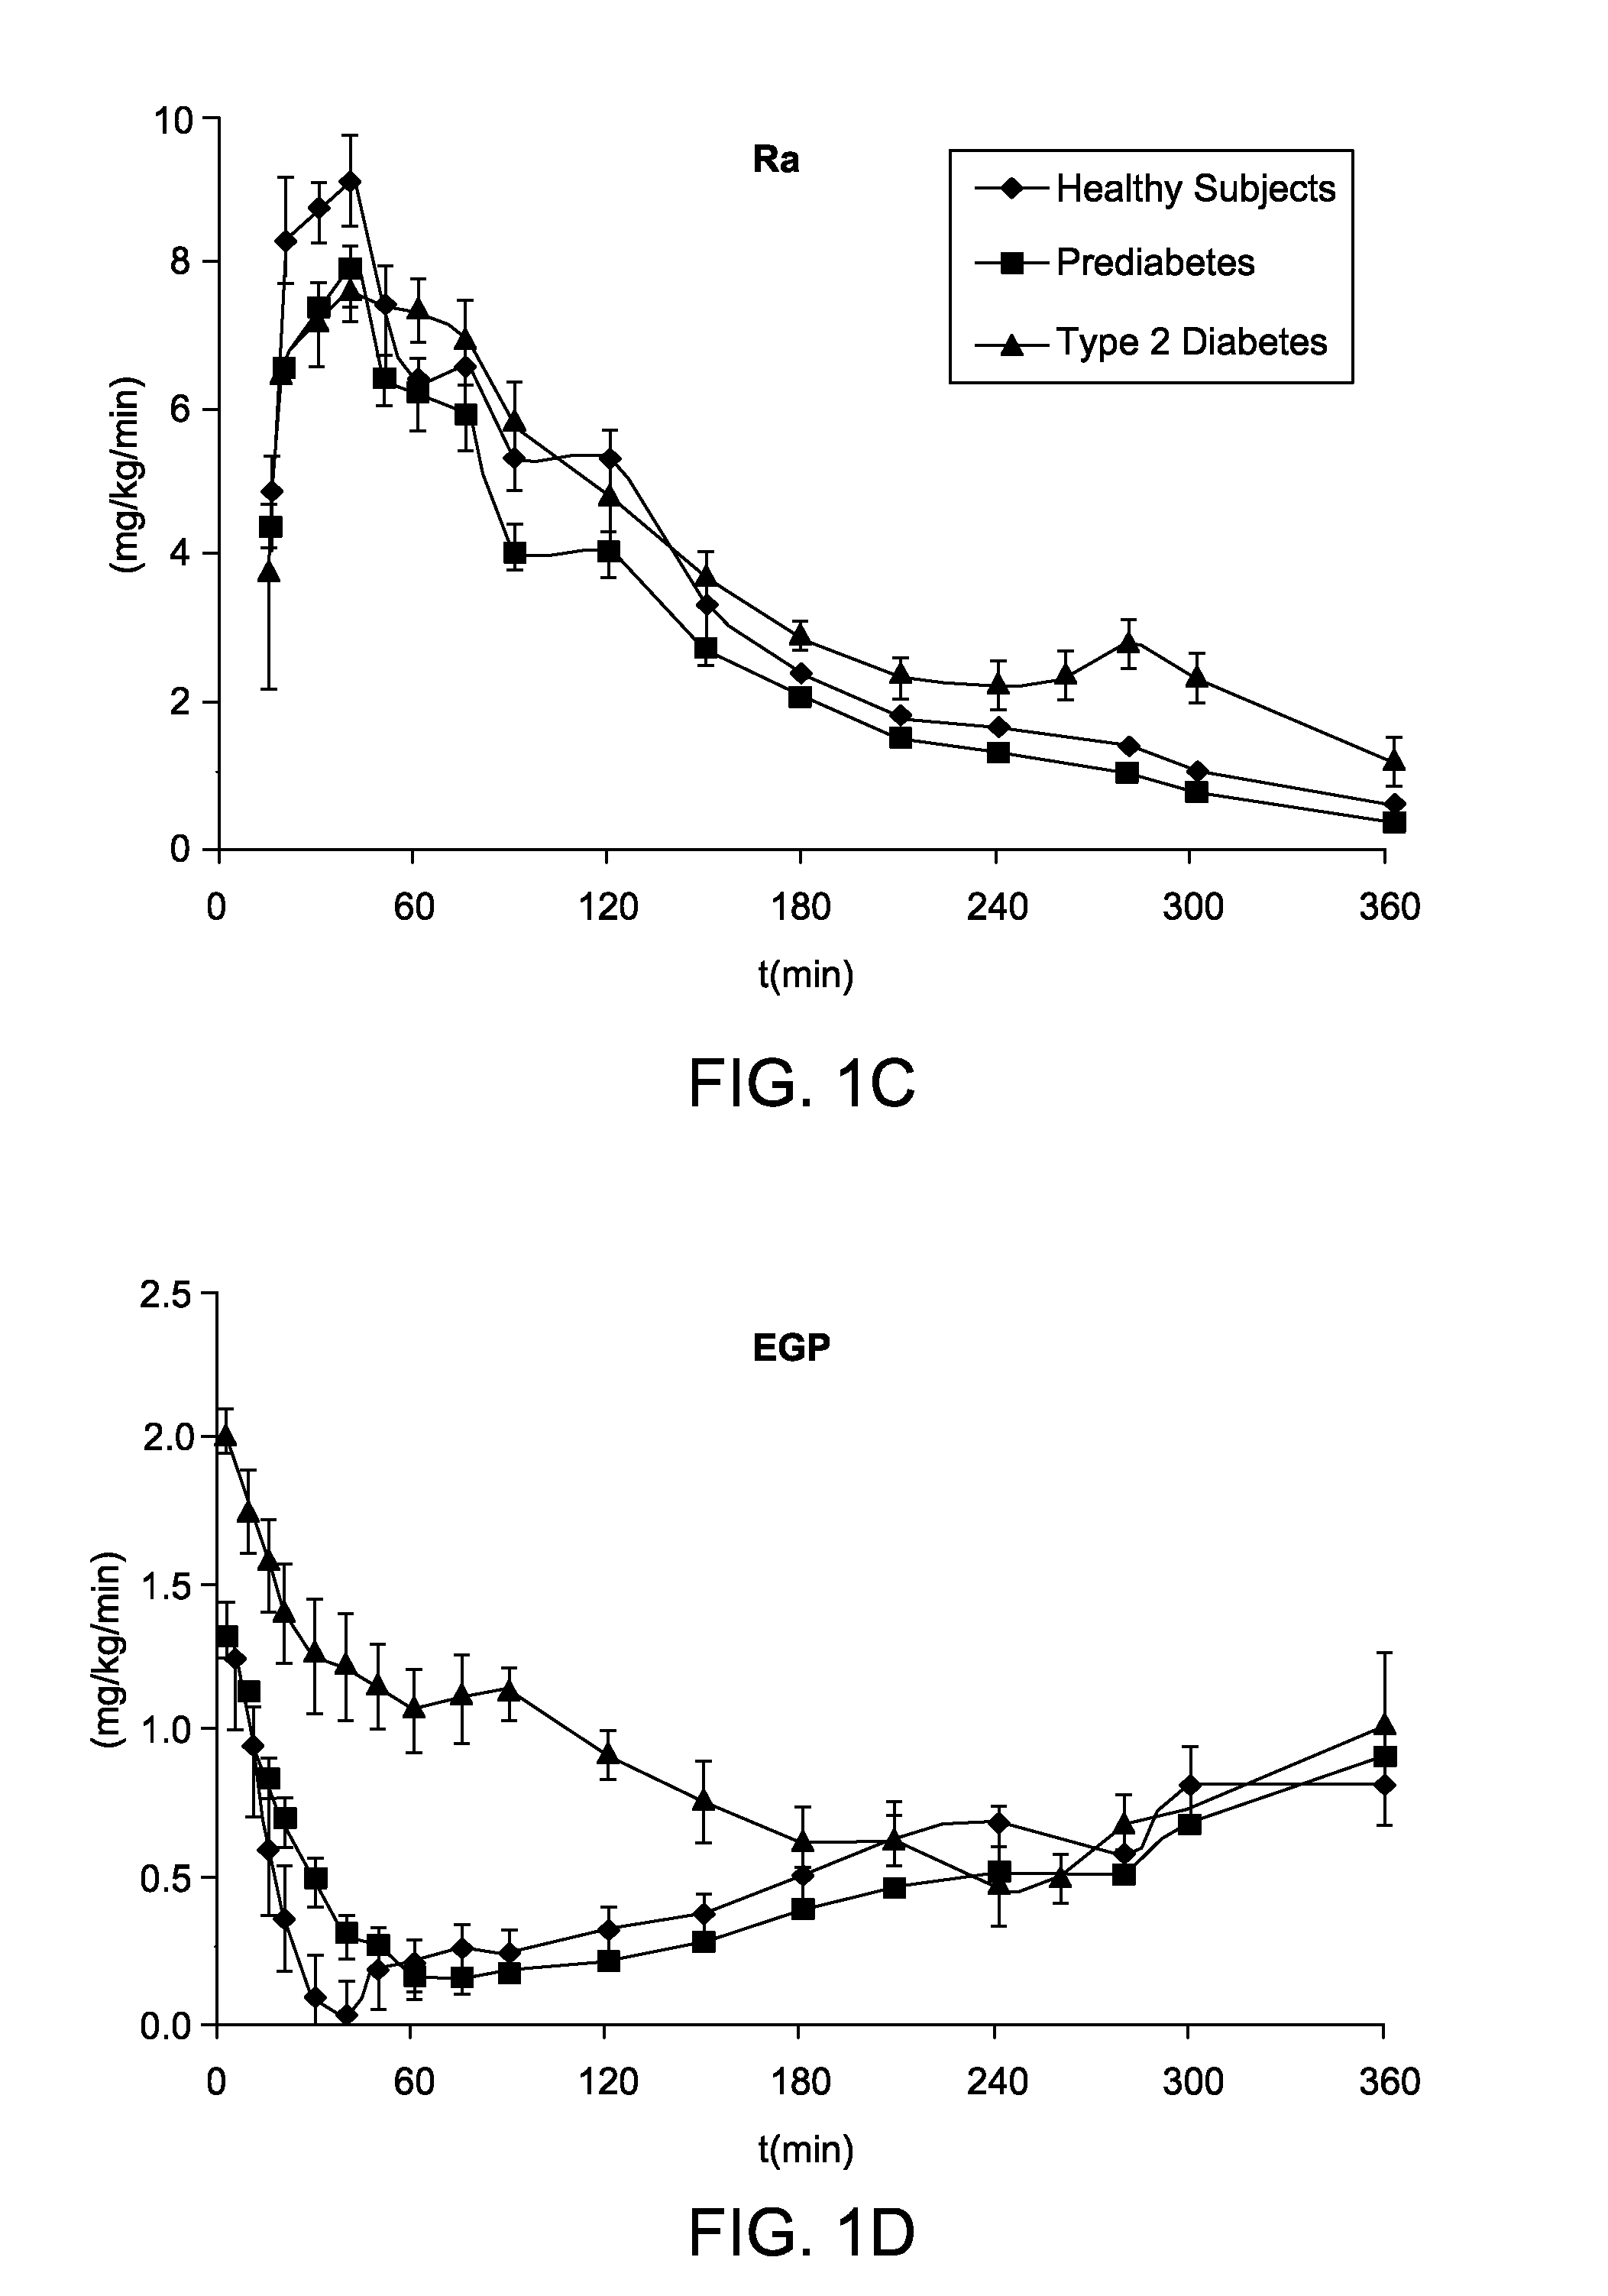 System, Method and Computer Simulation Environment For In Silico Trials in Pre-Diabetes and Type 2 Diabetes